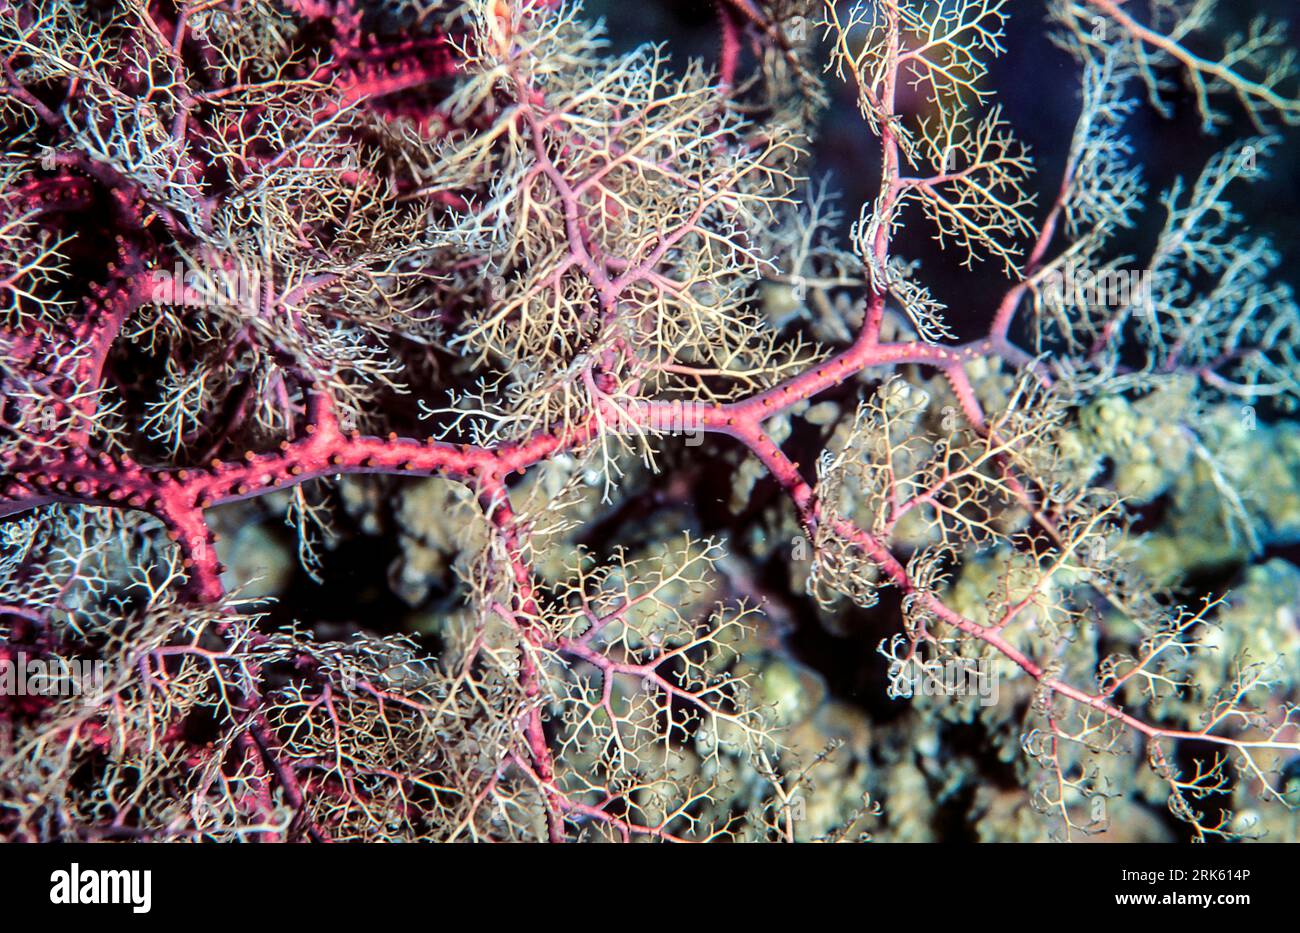 Close-up photo of a basket star (Astroboa sp.?) from Bunaken NP, North Sulawesi, Indonesia. Stock Photo